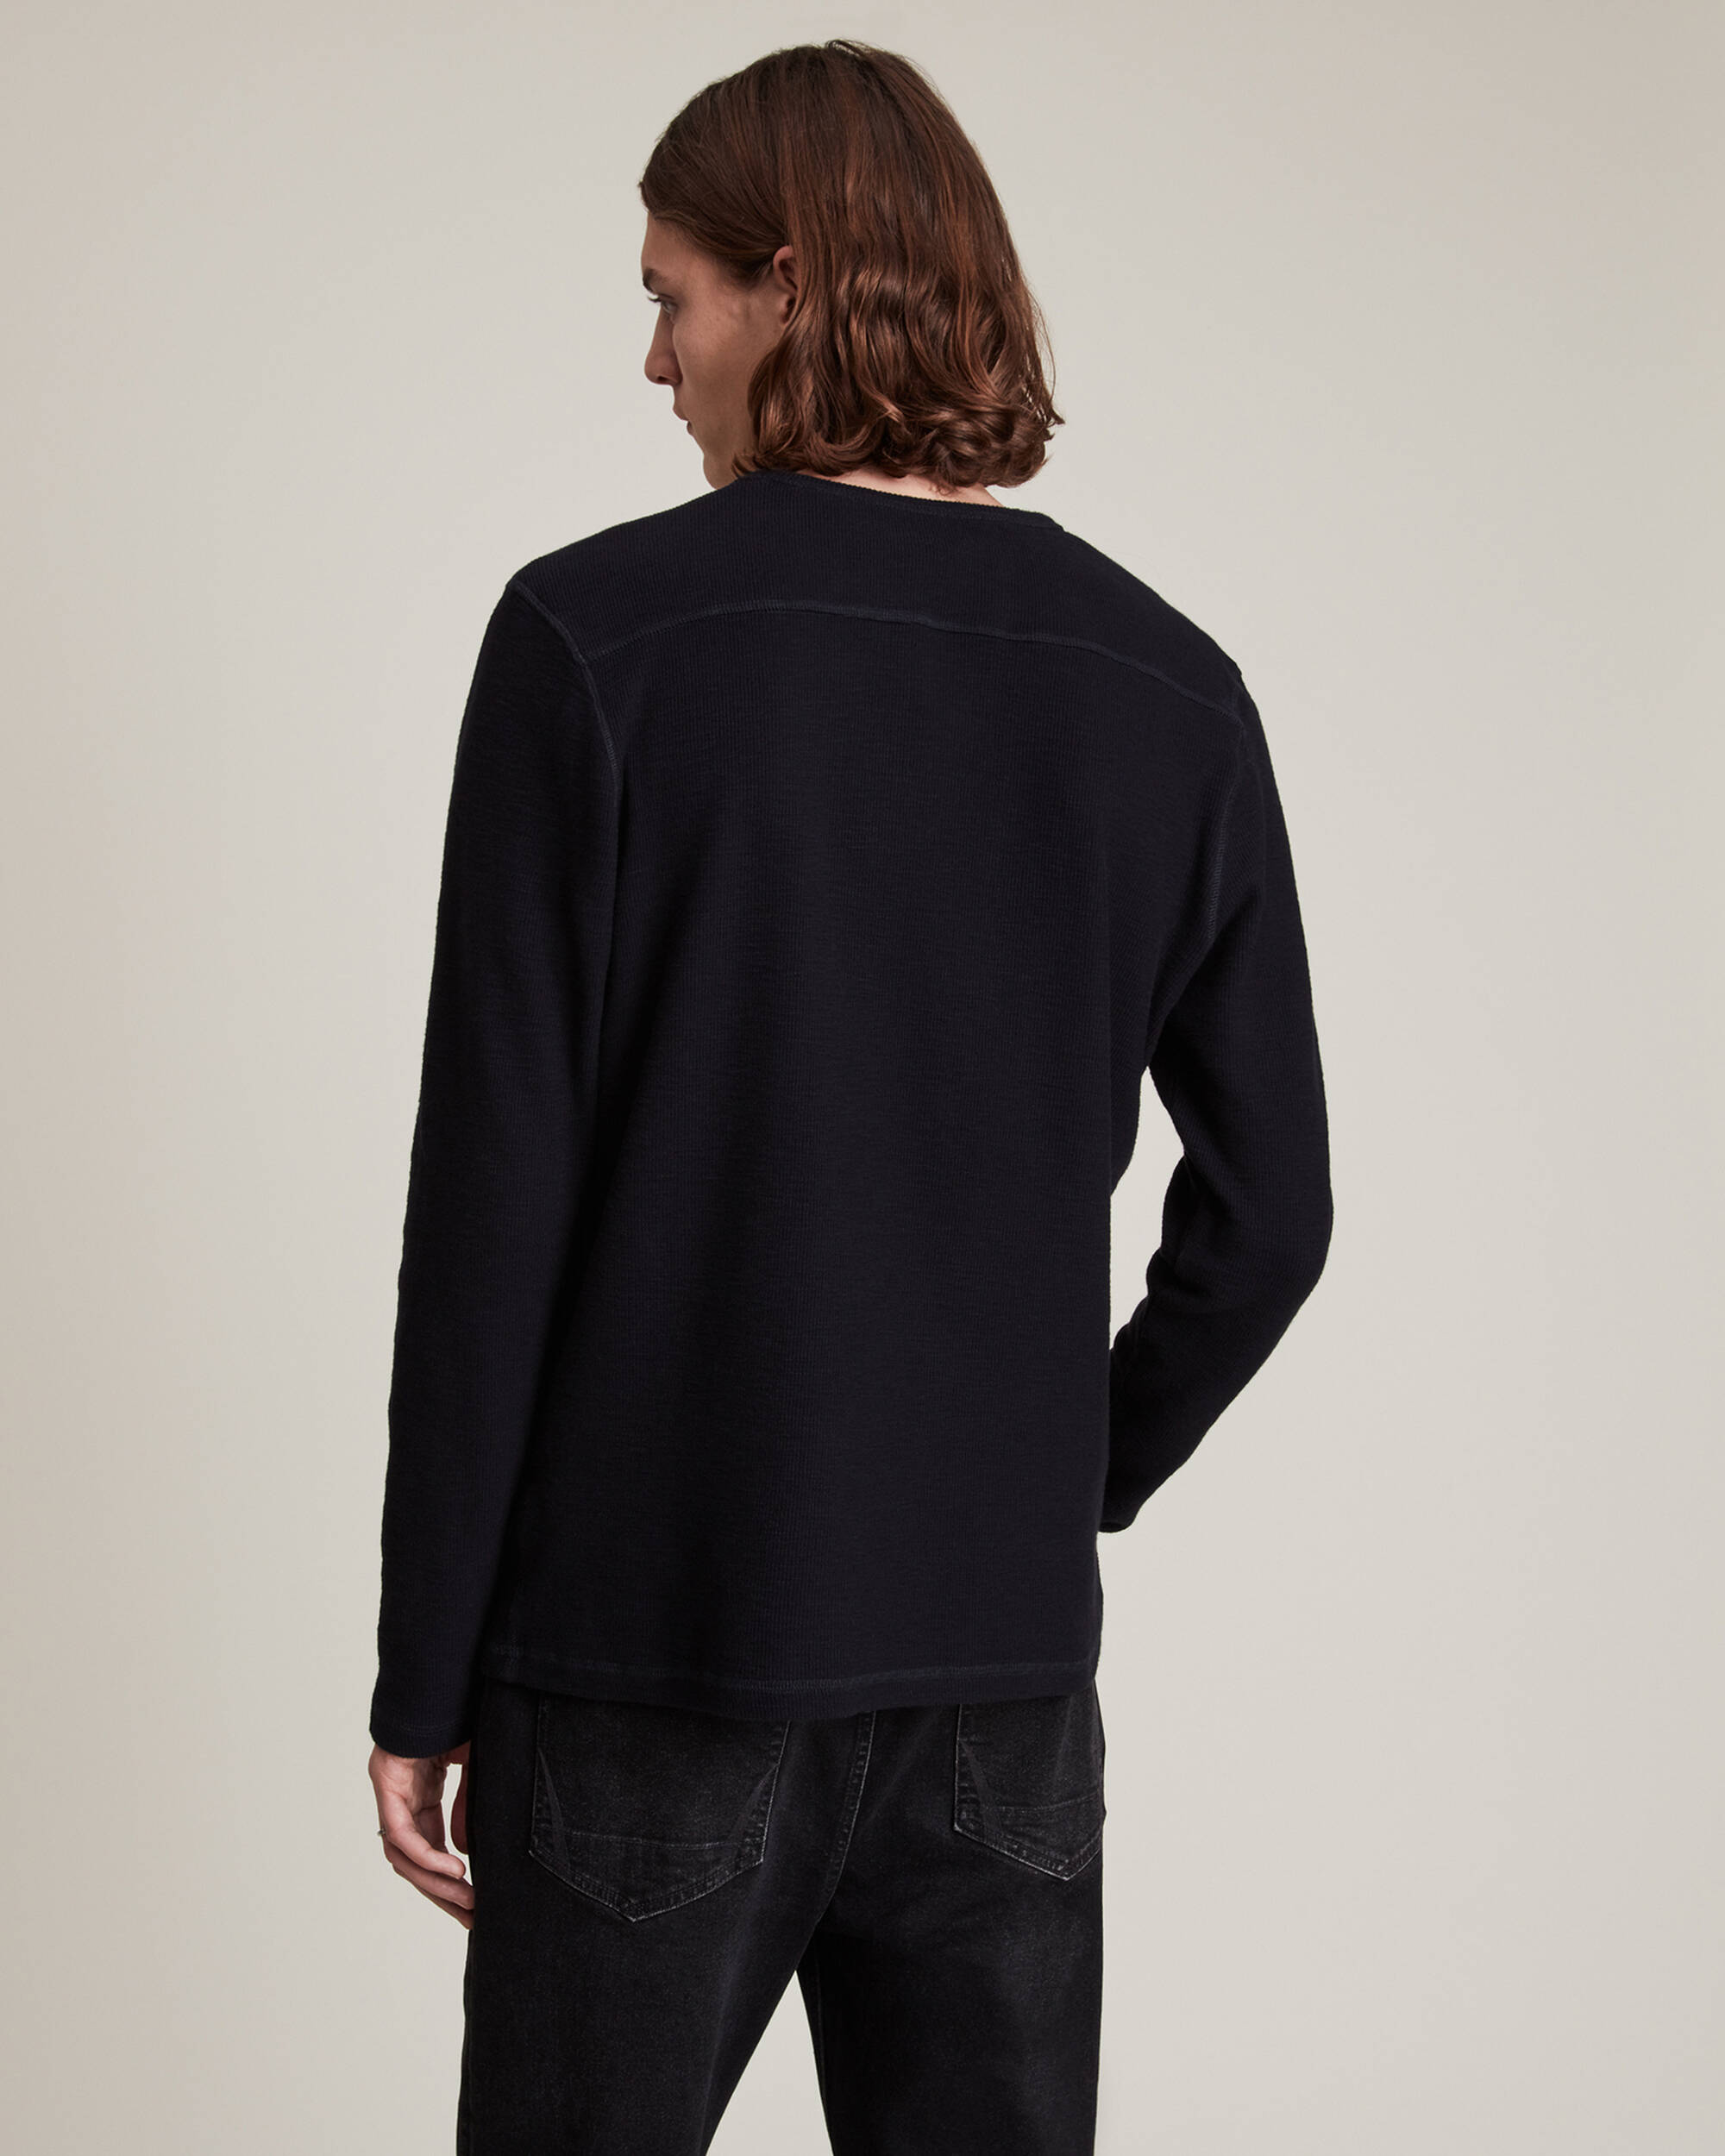 Muse Long Sleeve Crew T-Shirt INK NAVY | ALLSAINTS